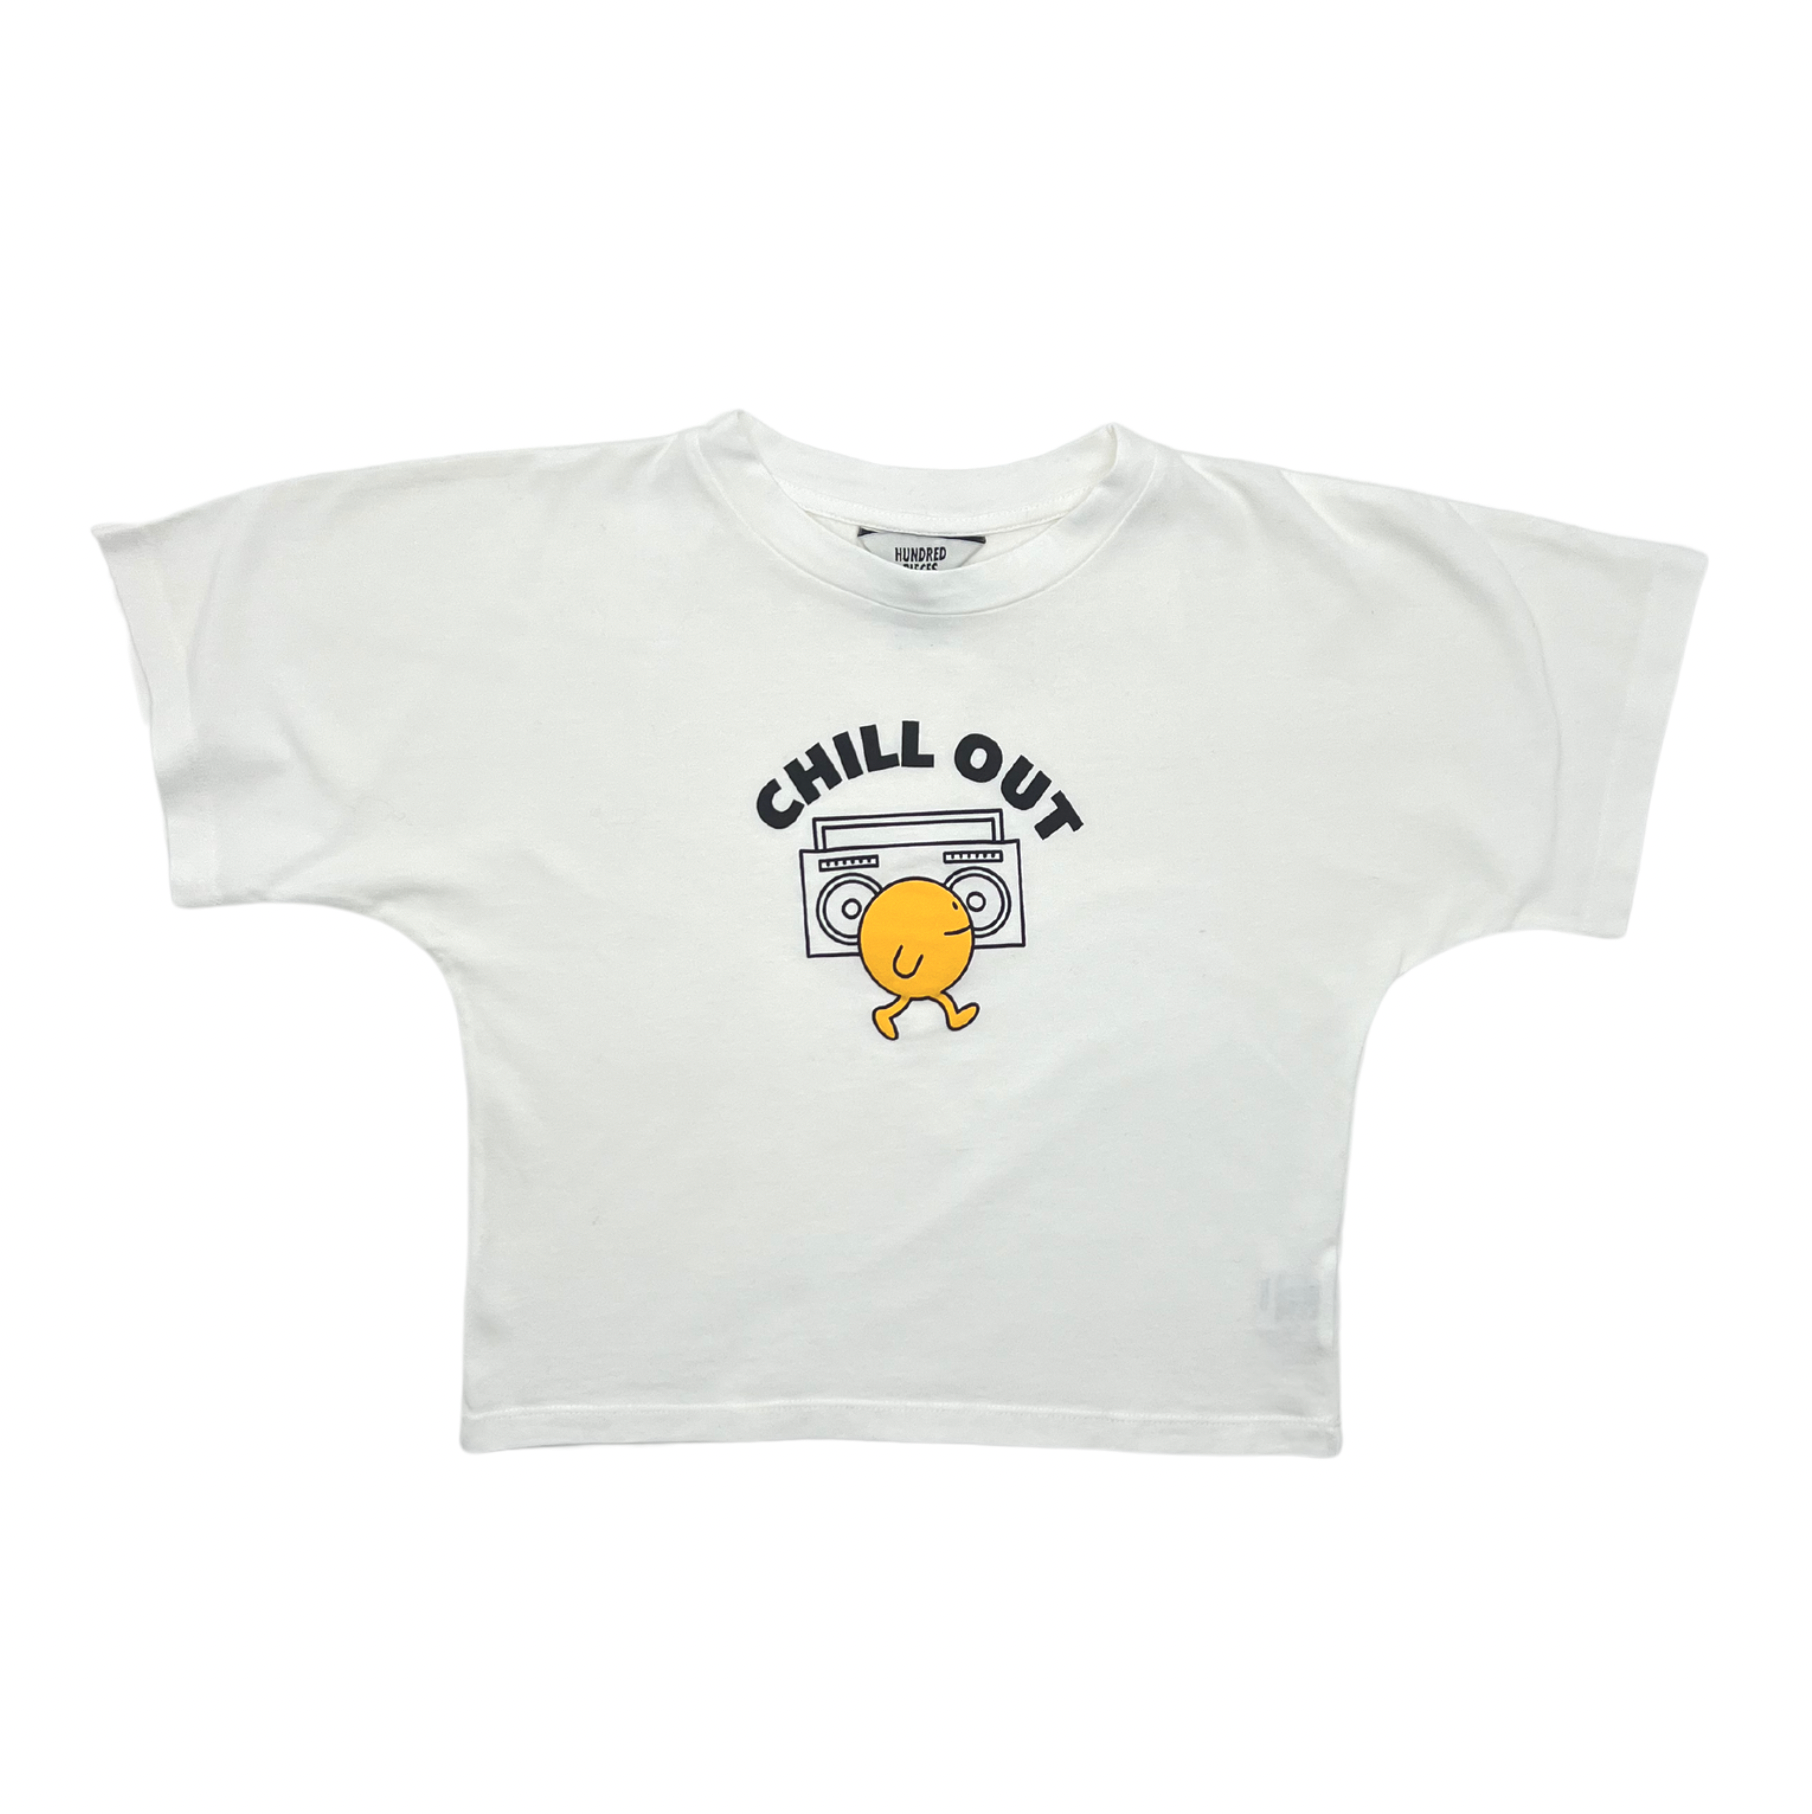 HUNDRED PIECES - T-shirt "chill out" - 8 ans